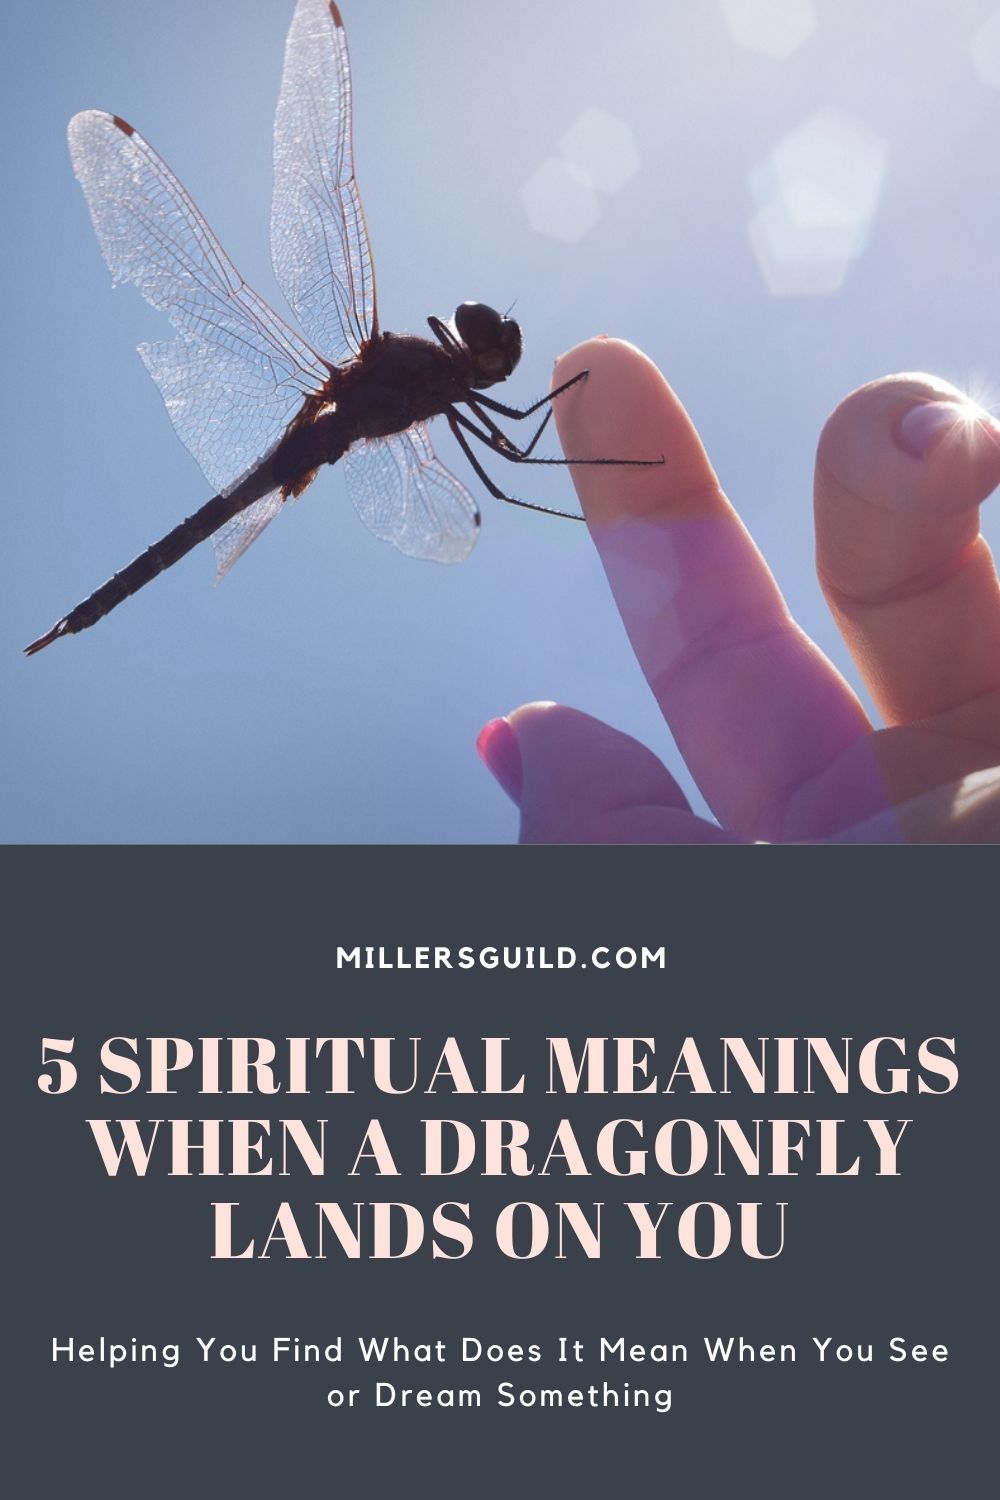 5 Spiritual Meanings When a Dragonfly Lands on You 2